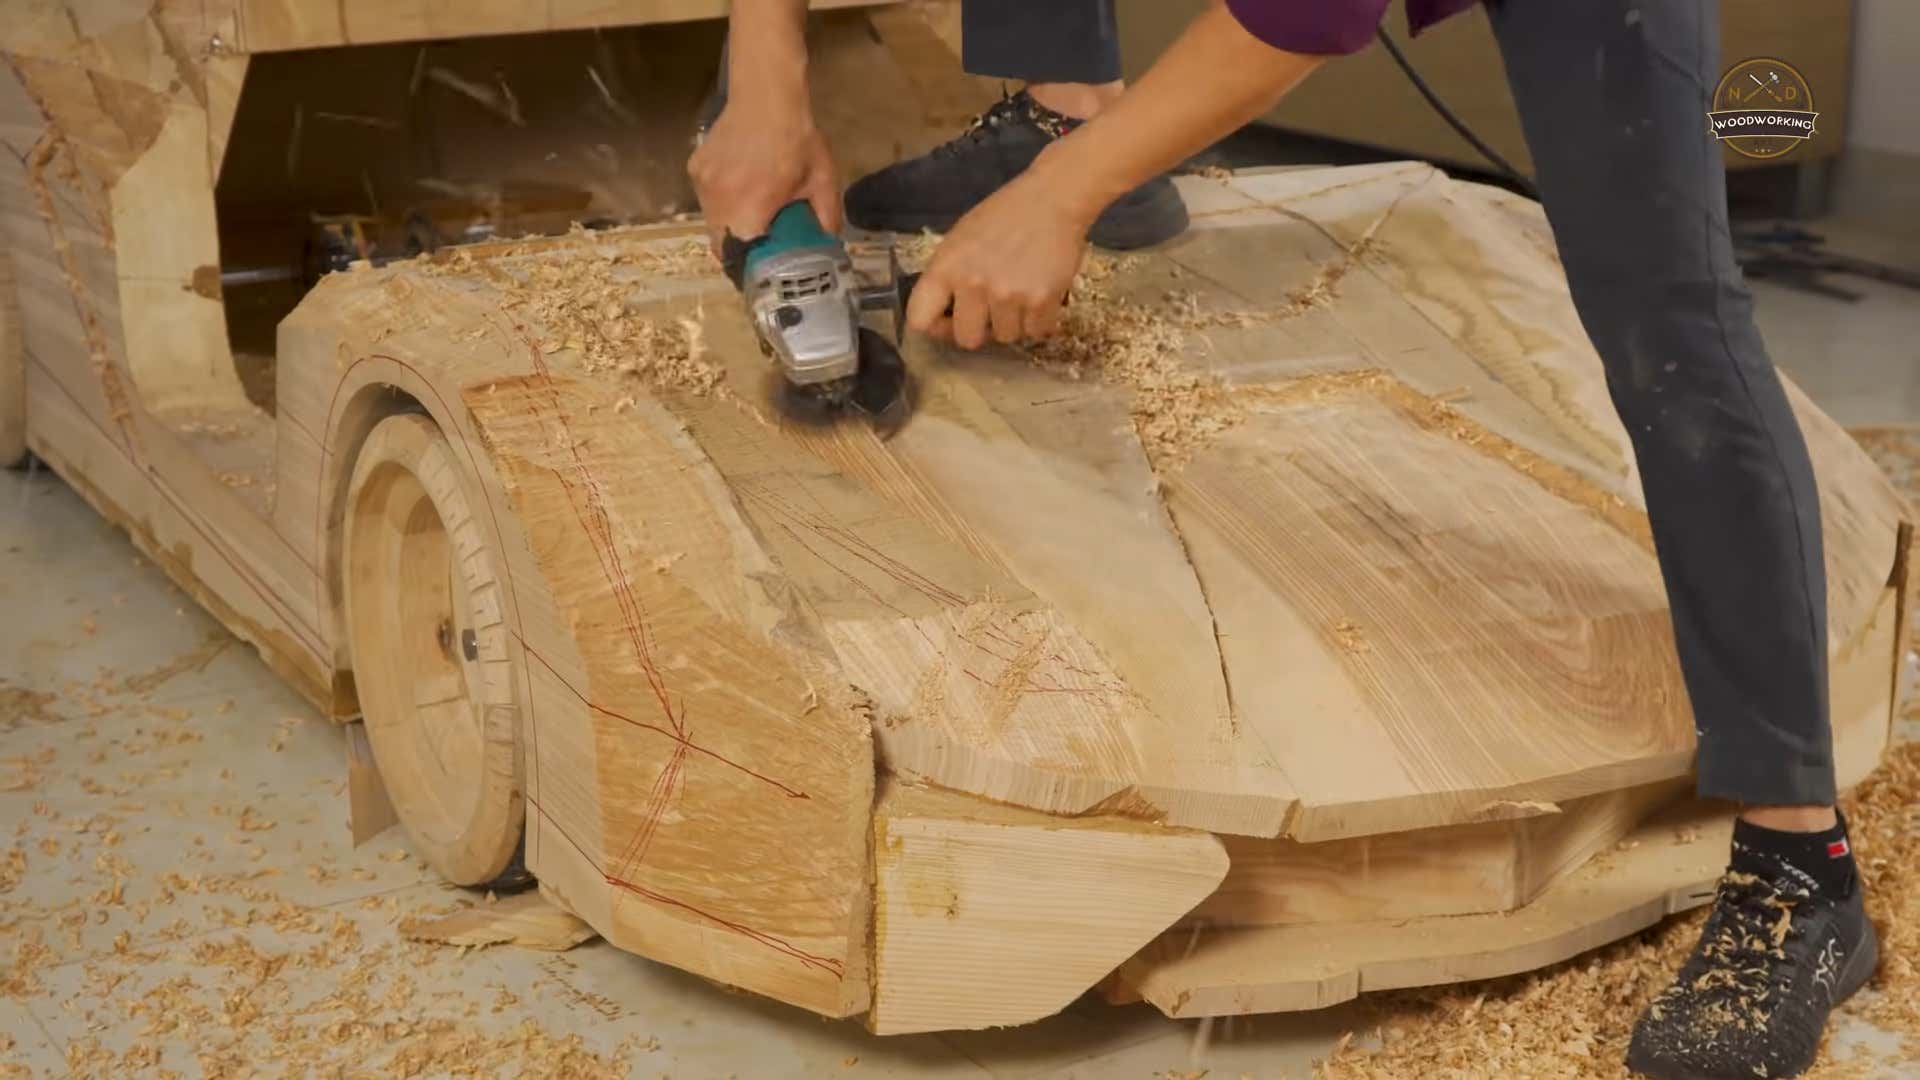 Watch: This Master Craftsman Carved a Mini Lamborghini Sían Out of Wood, car, Father's Day, gift, most news without bias daily